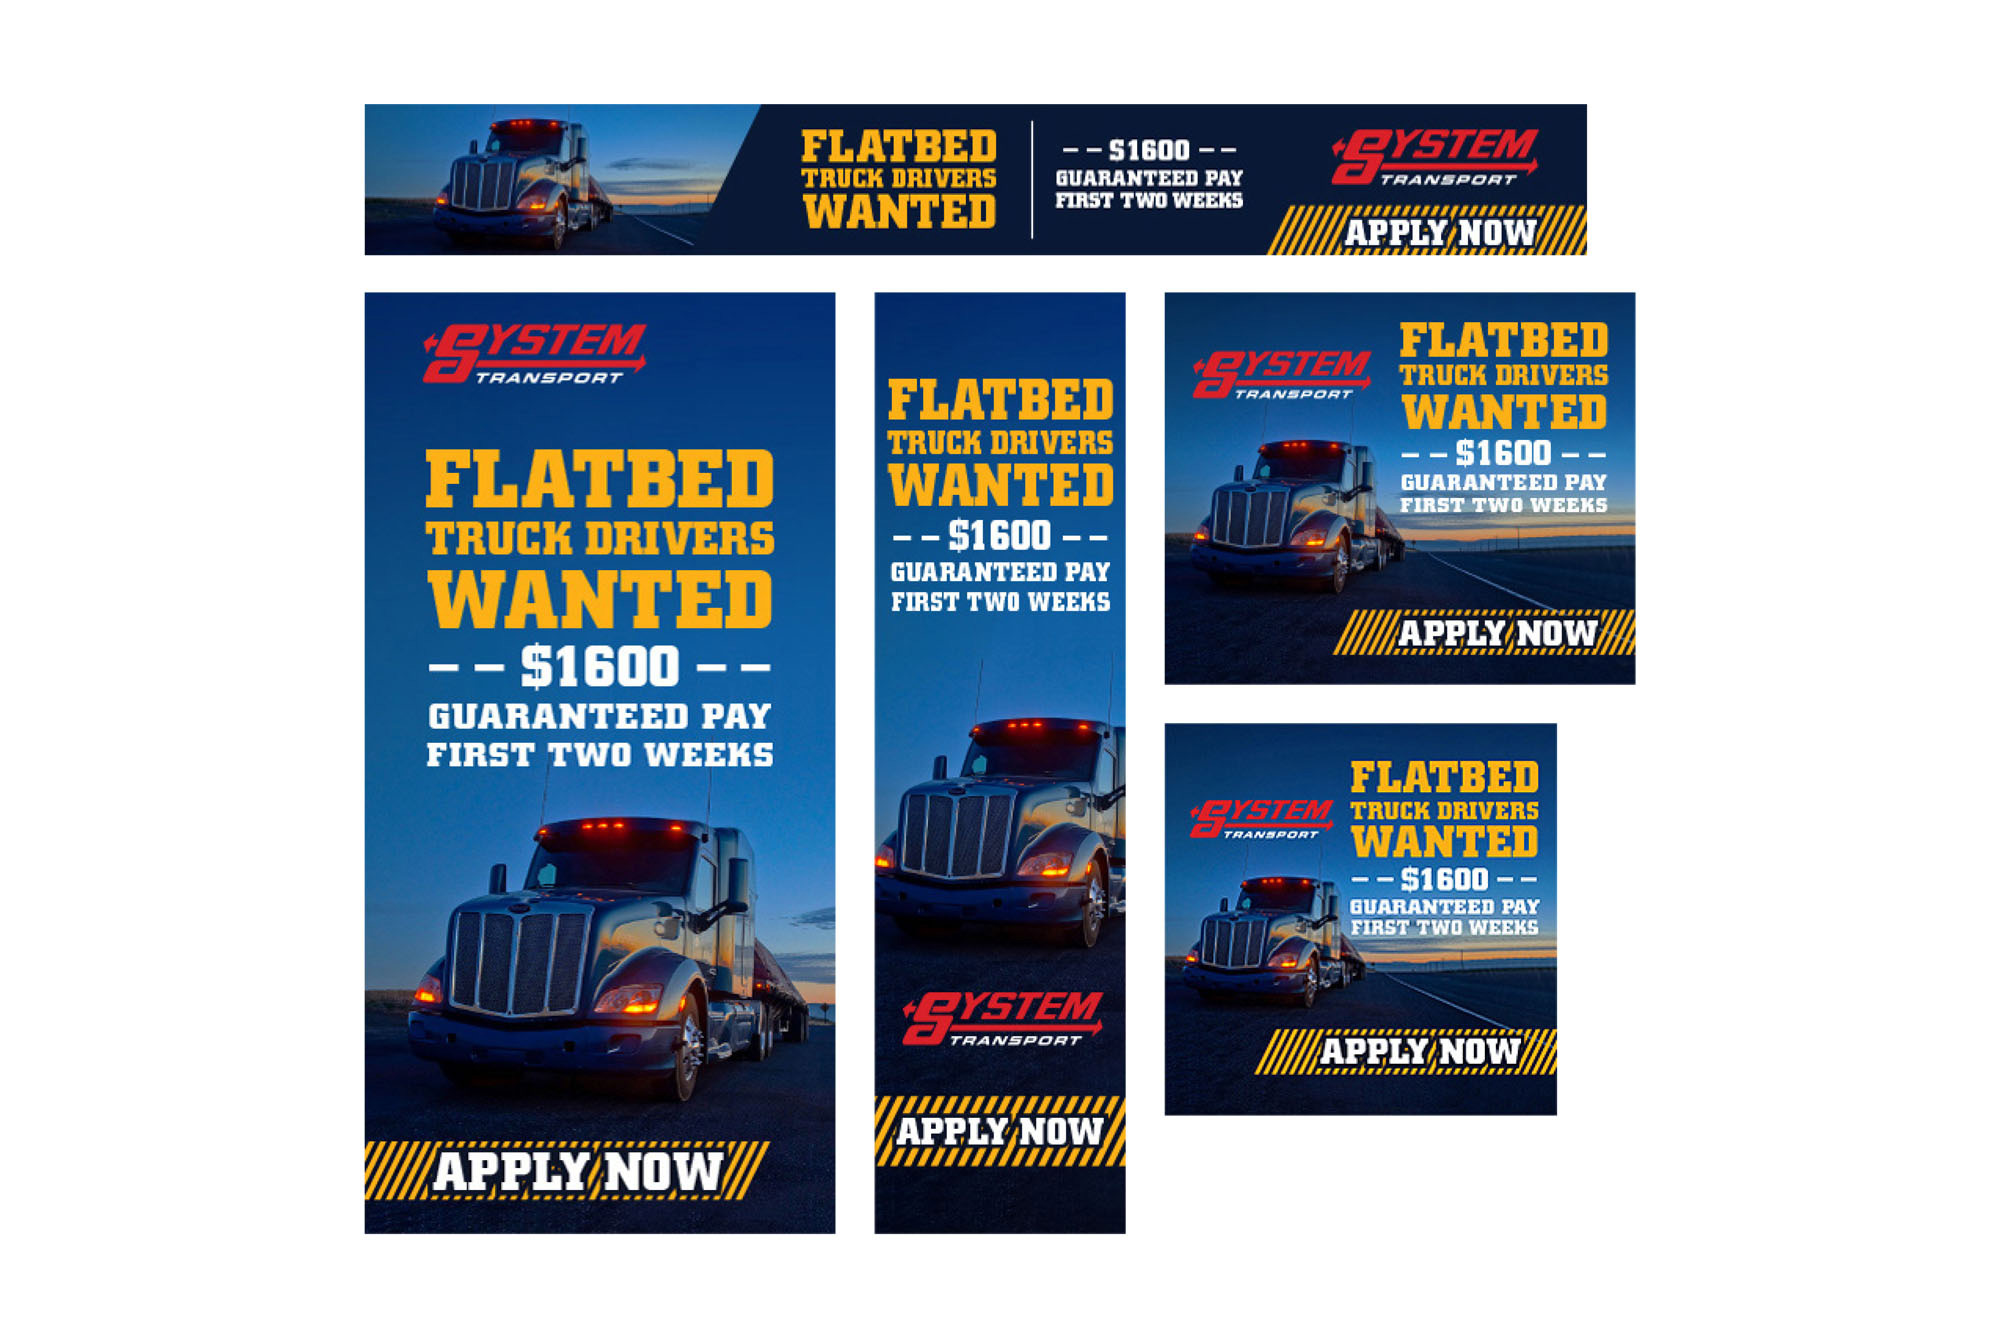 Systems Transport social media ad designs for driver recruitment.